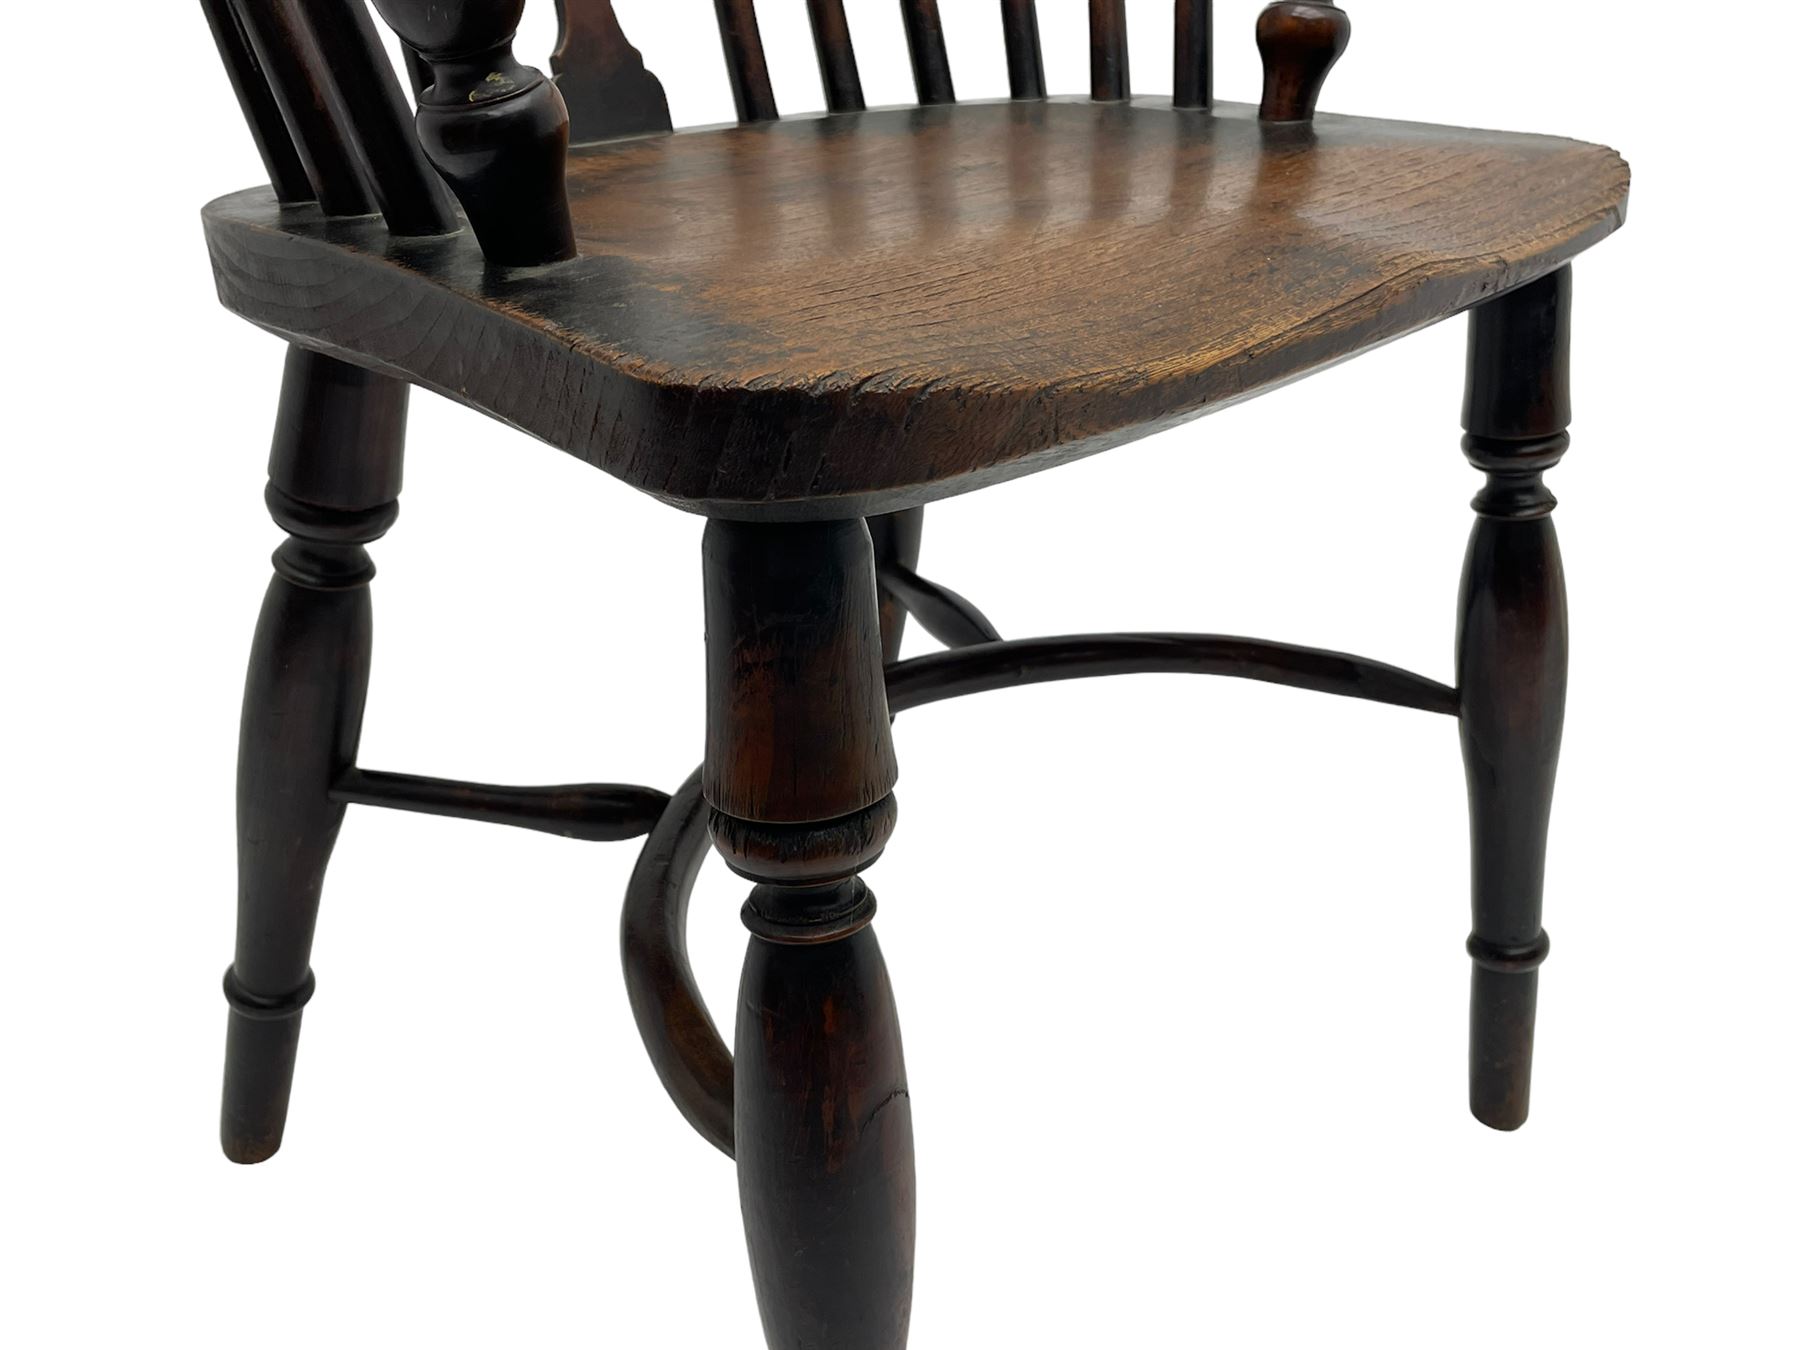 19th century yew wood and elm Windsor chair - Image 6 of 9